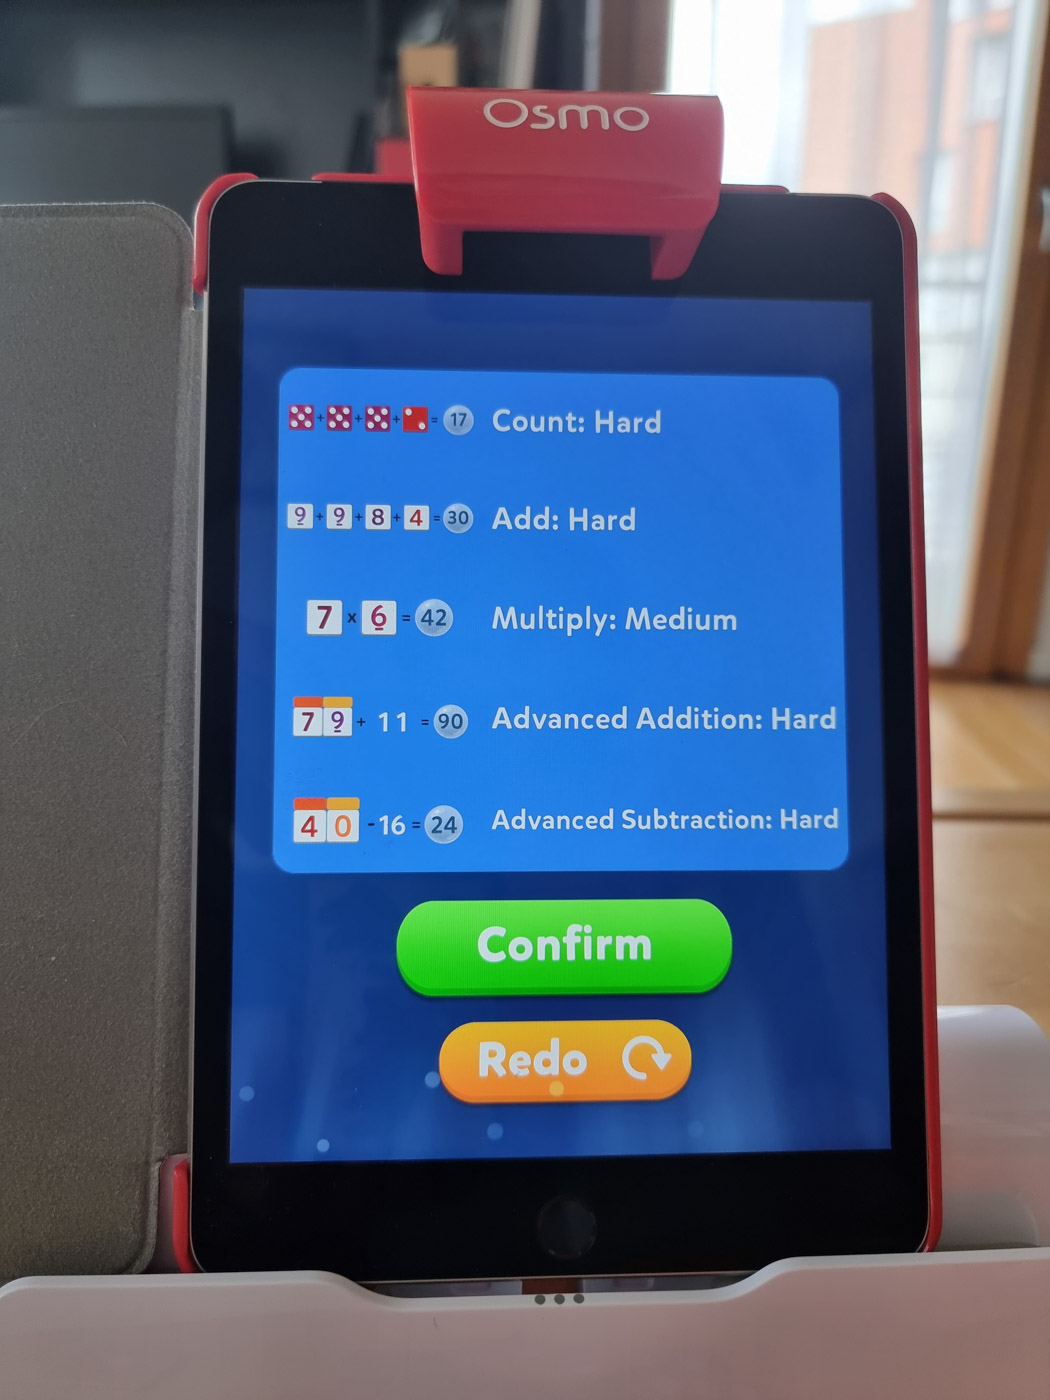 In some apps, parents can adjust the difficulty level to suit the child's.  © Adrian BRANCO / 01net.com